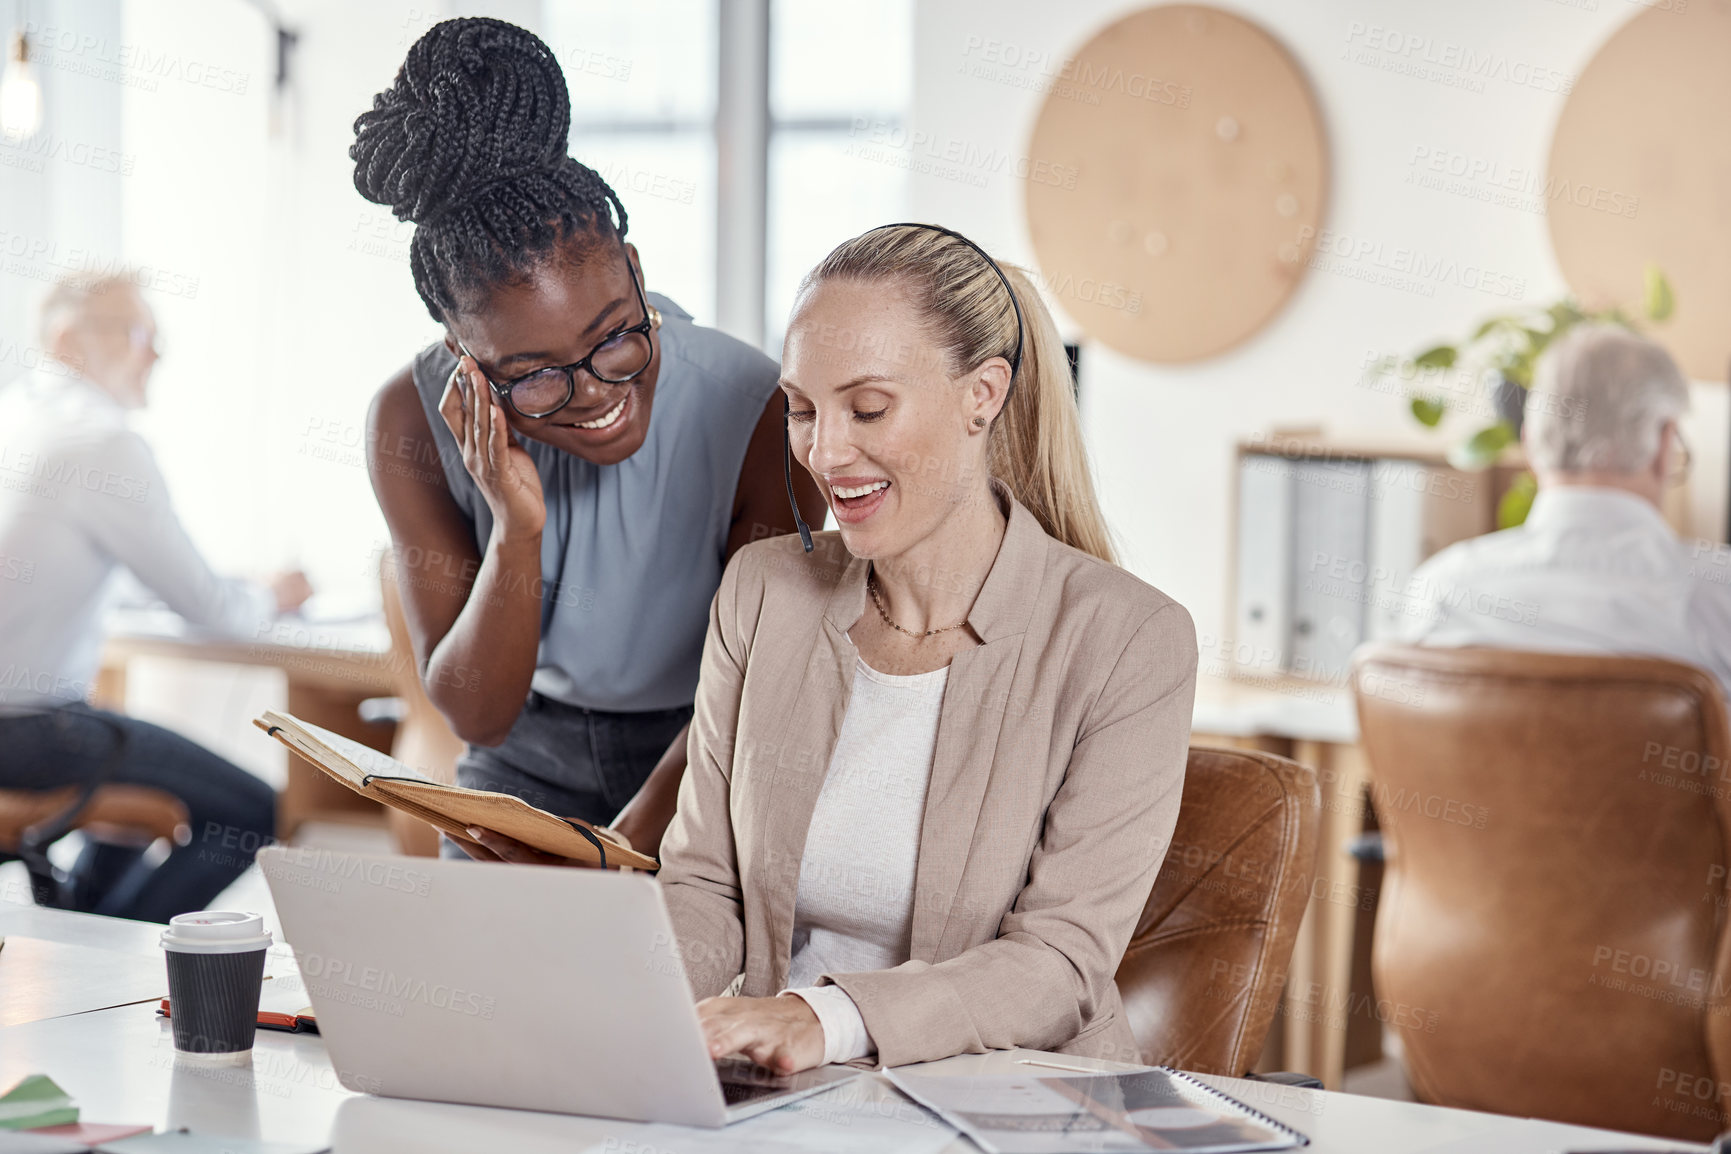 Buy stock photo Shot of two young women using headsets and laptop in a modern office